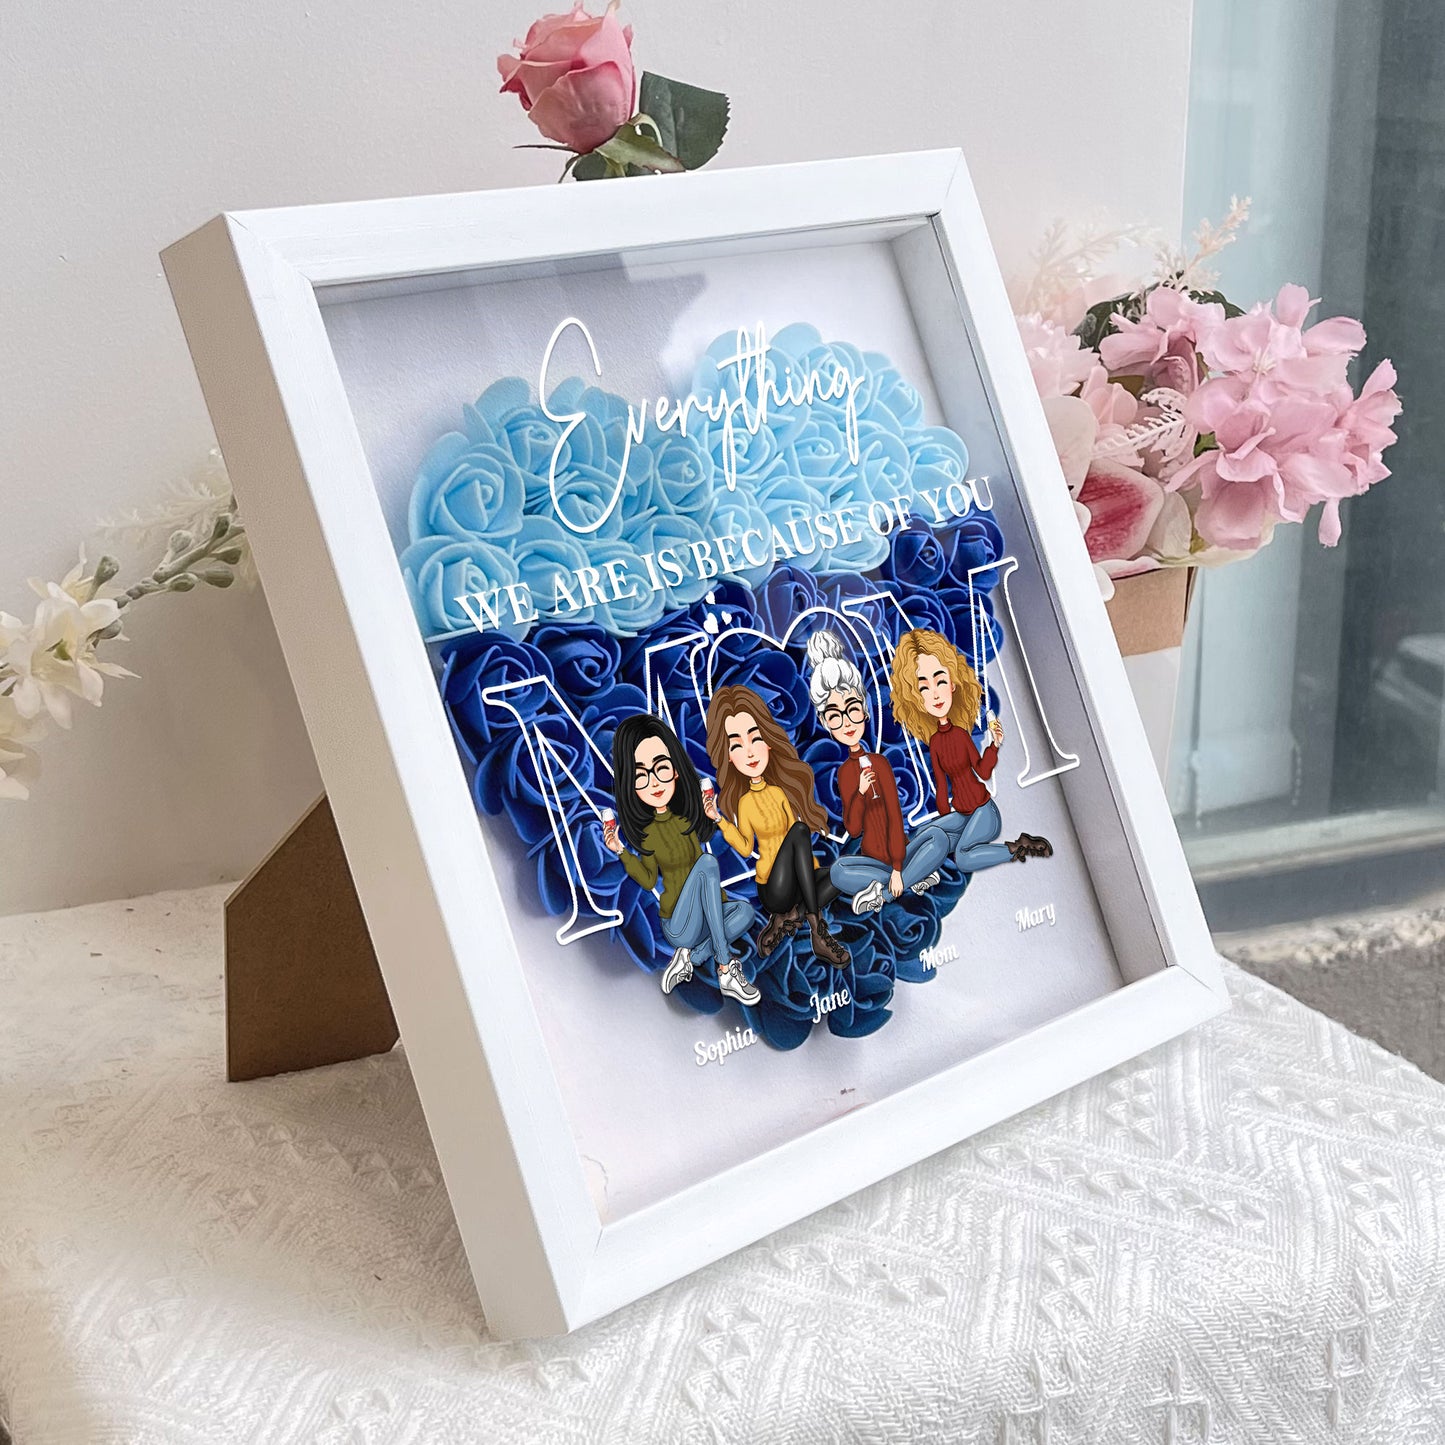 Everything We Are Is Because Of You - Personalized Flower Shadow Box